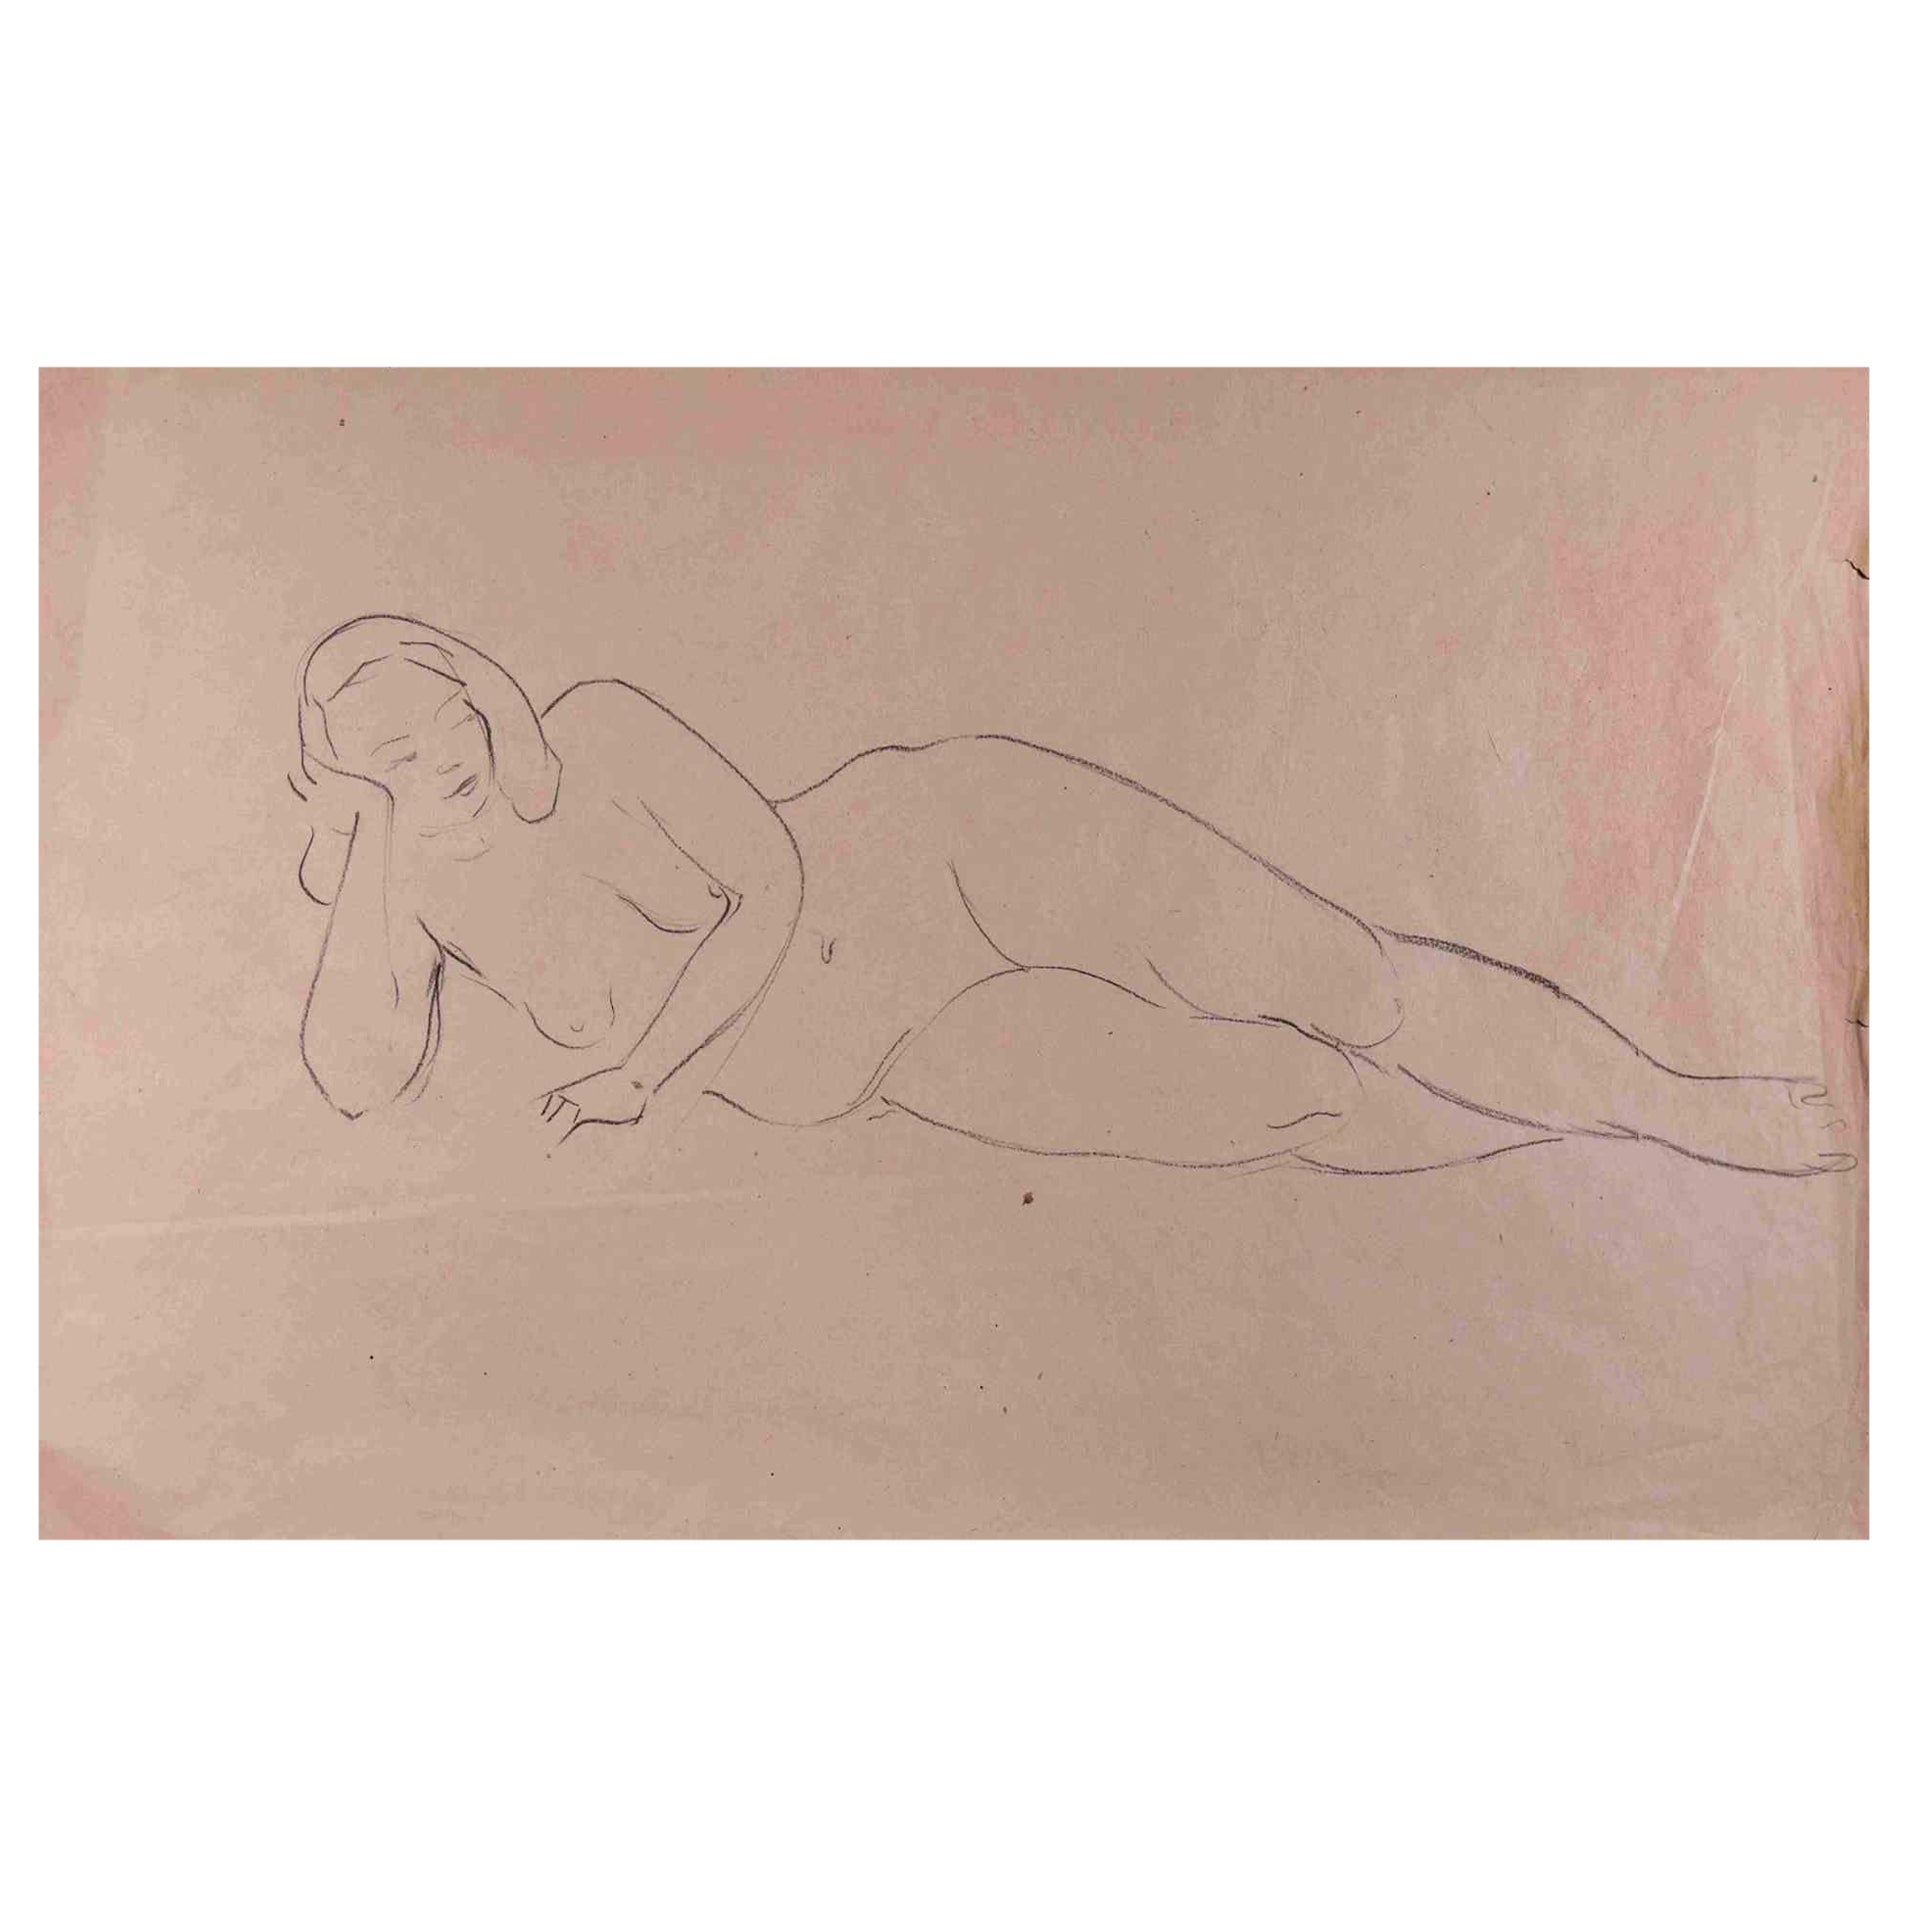 Unknown Figurative Art - Nude Woman - Original Pen Drawing on Paper - Mid 20th Century